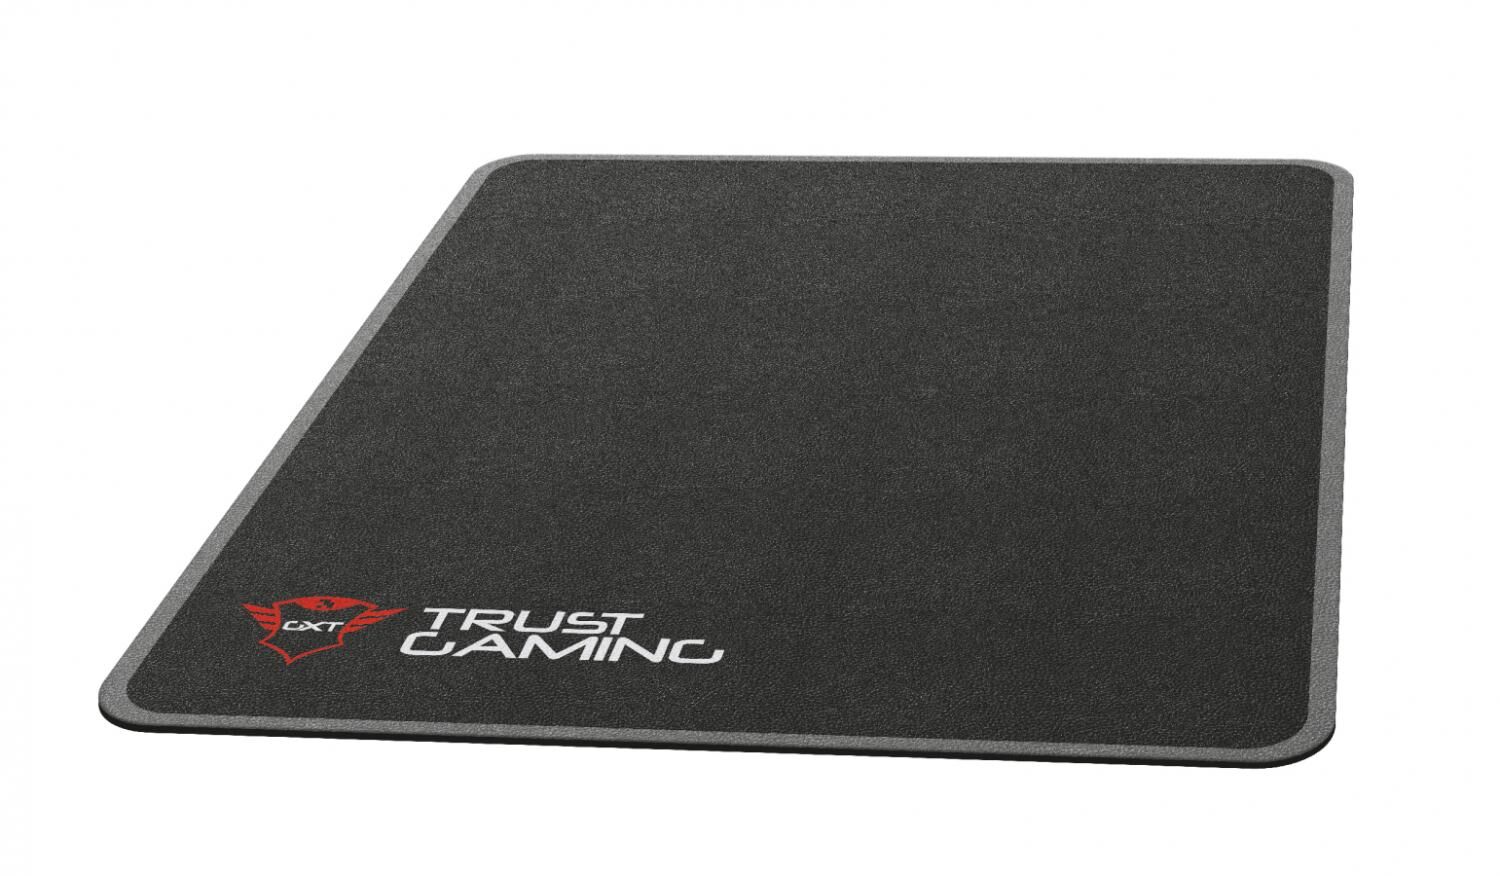 trust 22524 mouse pad gaming 990 x 1200 mm - 22524 gxt 715 chair mat